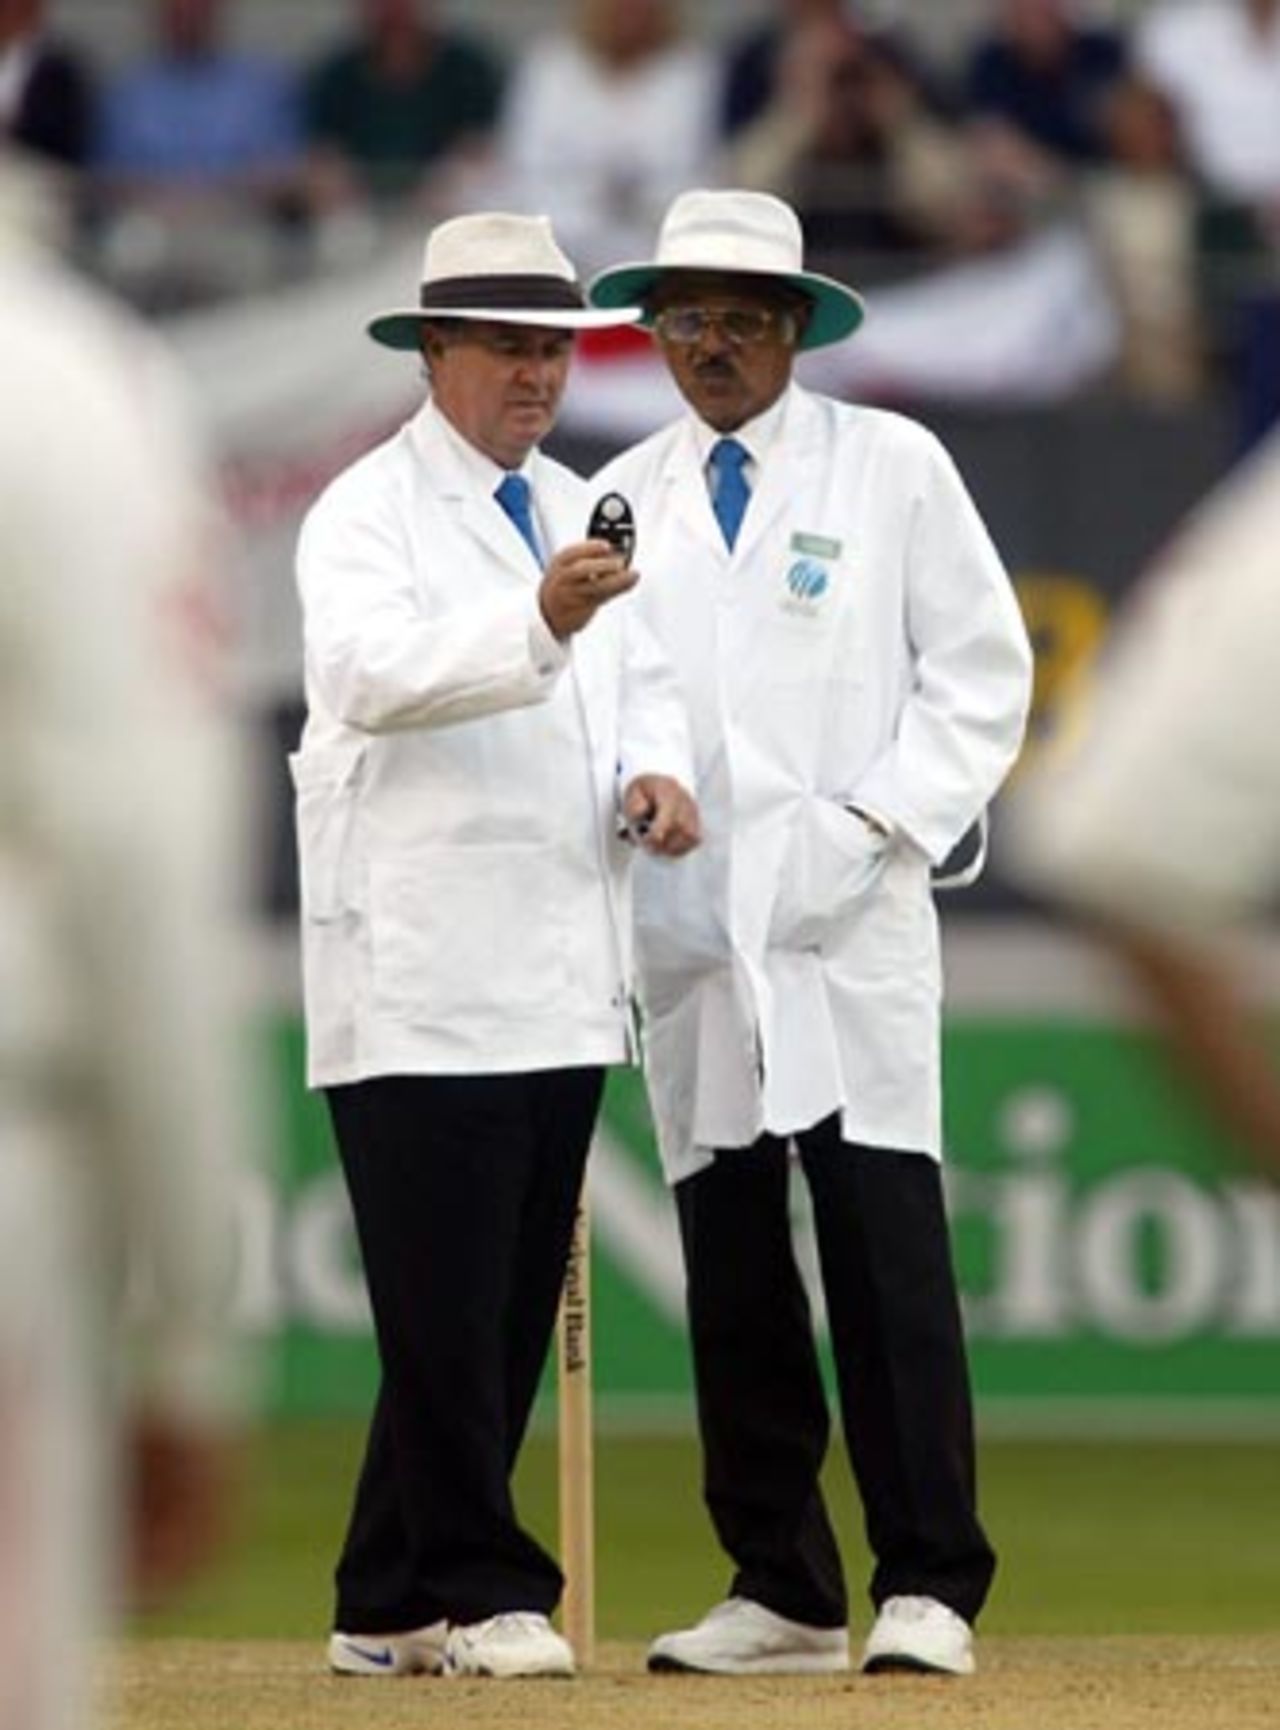 Umpires Doug Cowie (left) and Srinivas Venkataraghan from India check the light. It was subsequently offered to the New Zealand batsmen who accepted and the first day's play ended after conditions failed to improve. 3rd Test: New Zealand v England at Eden Park, Auckland, 30 March-3 April 2002 (30 March 2002).